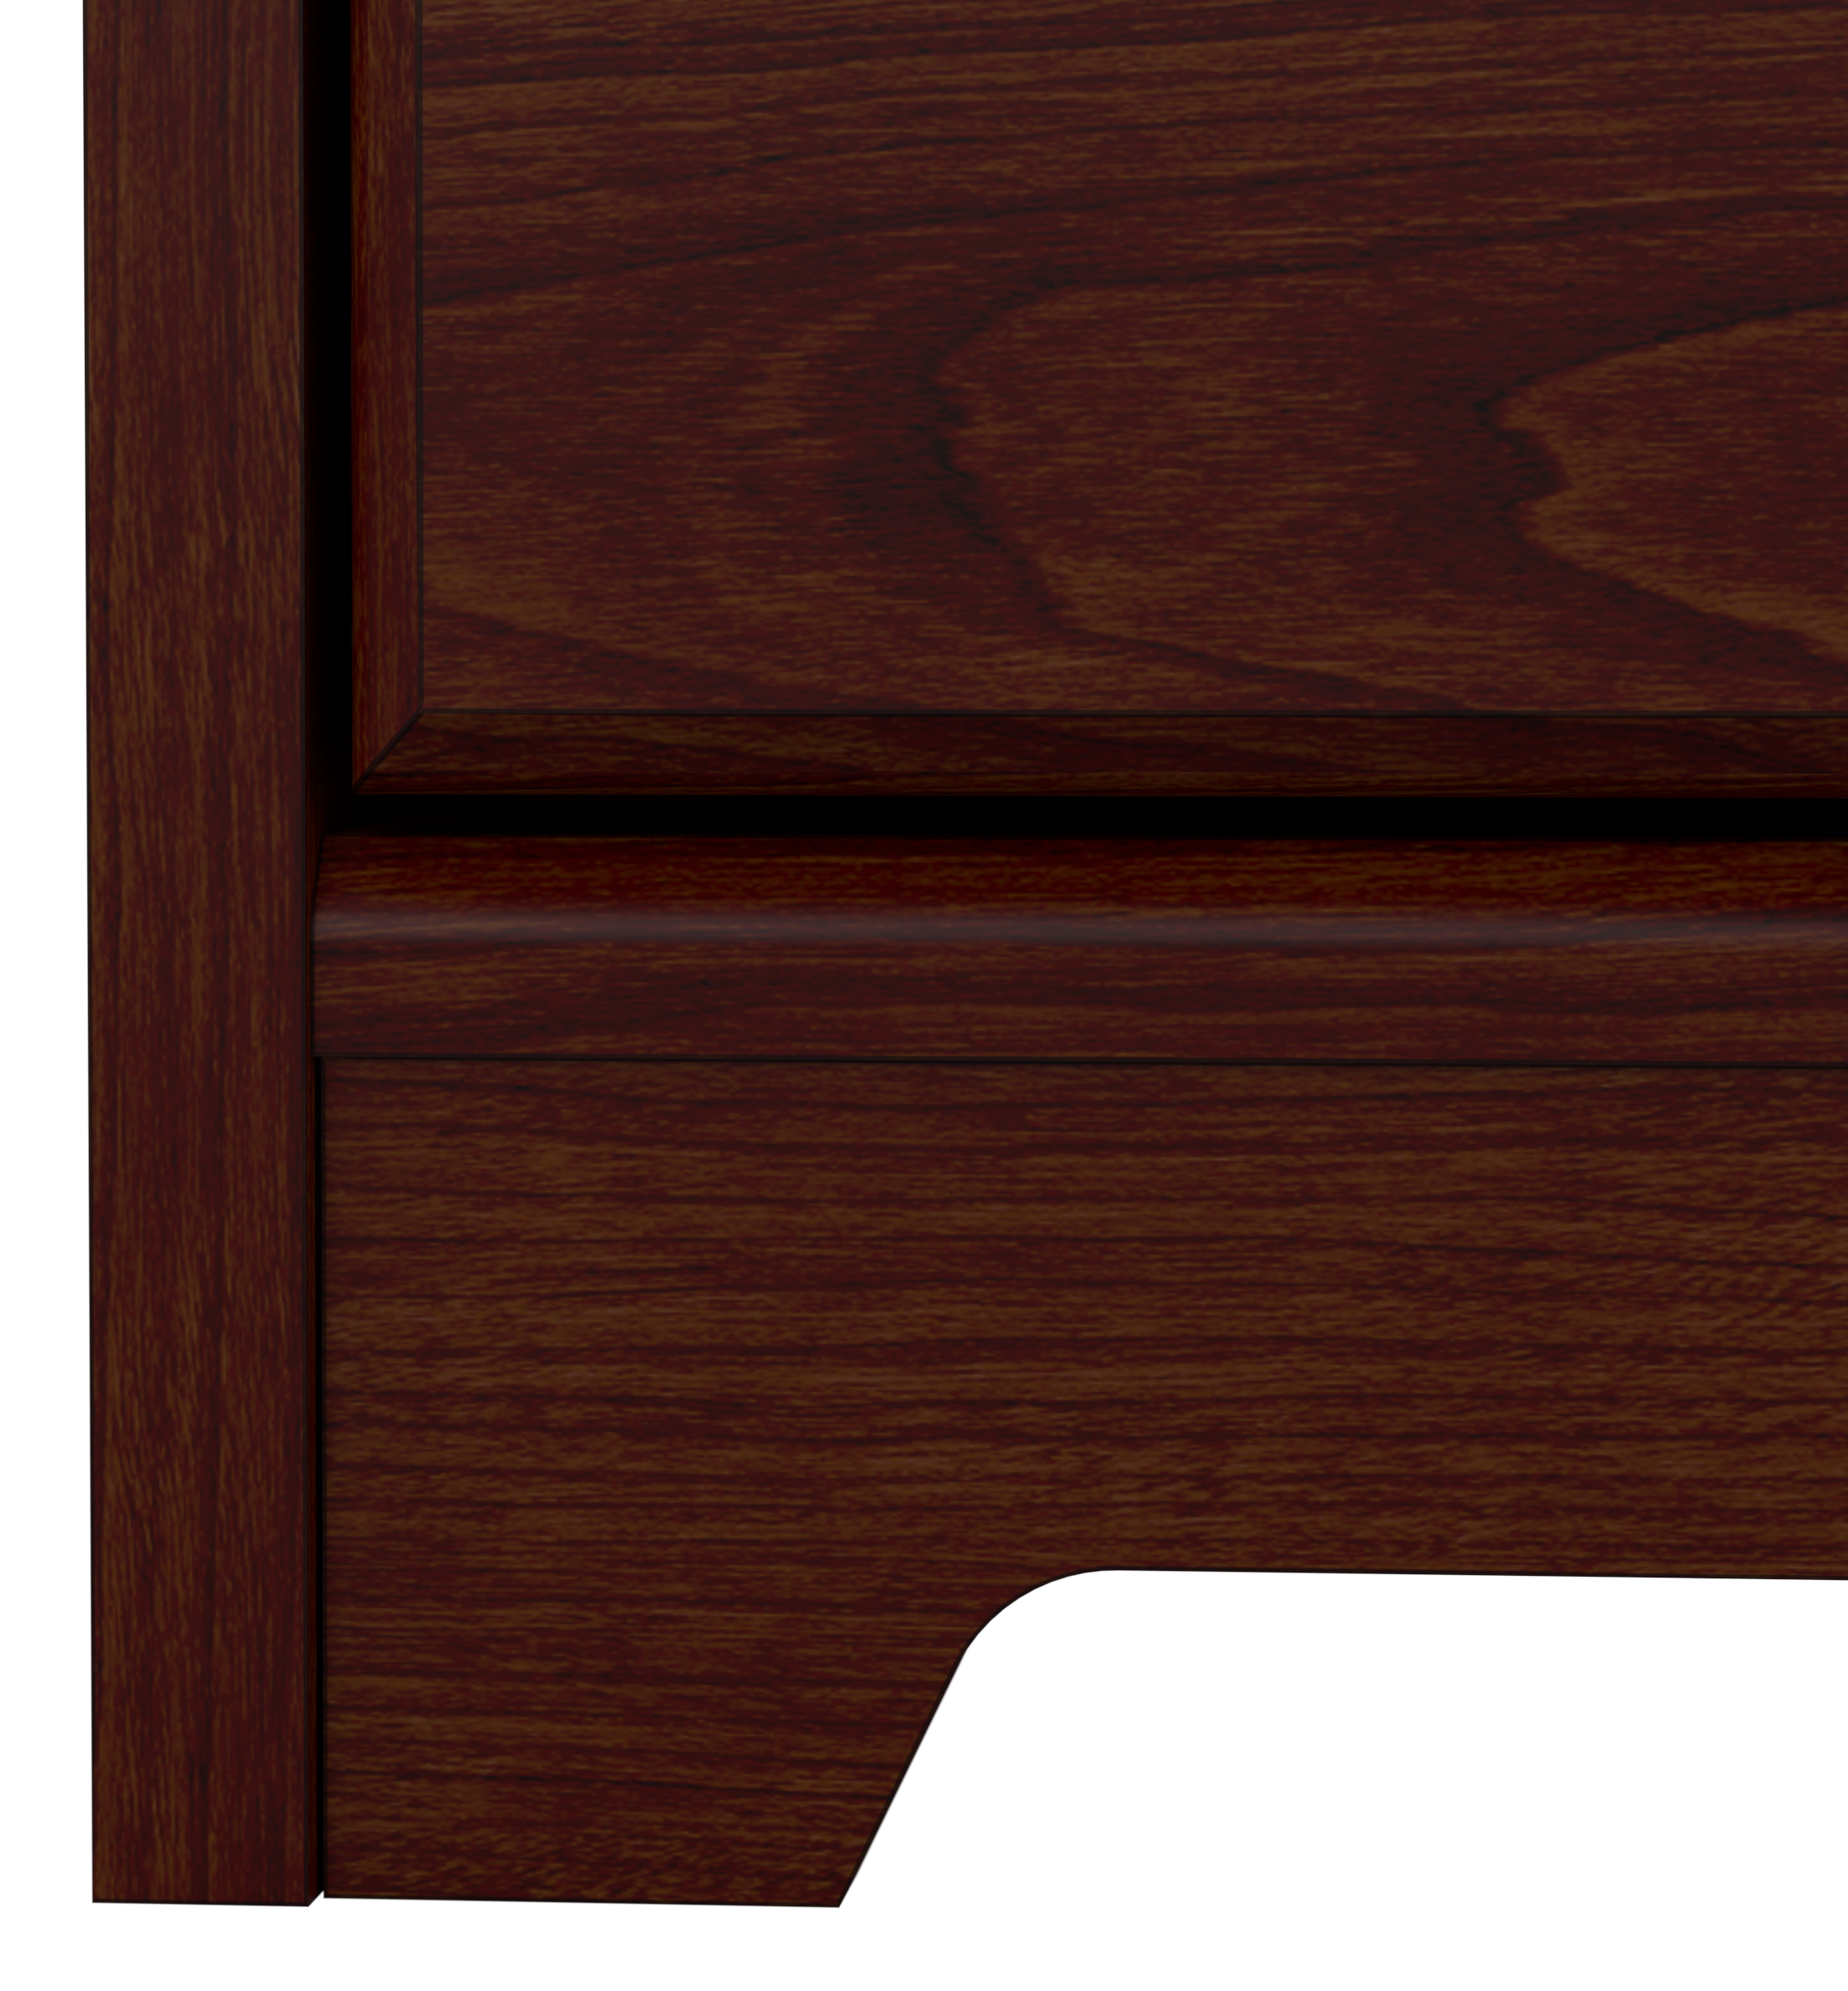 Shop Bush Furniture Cabot Tall Bathroom Storage Cabinet with Doors 04 WC31499-Z1 #color_harvest cherry